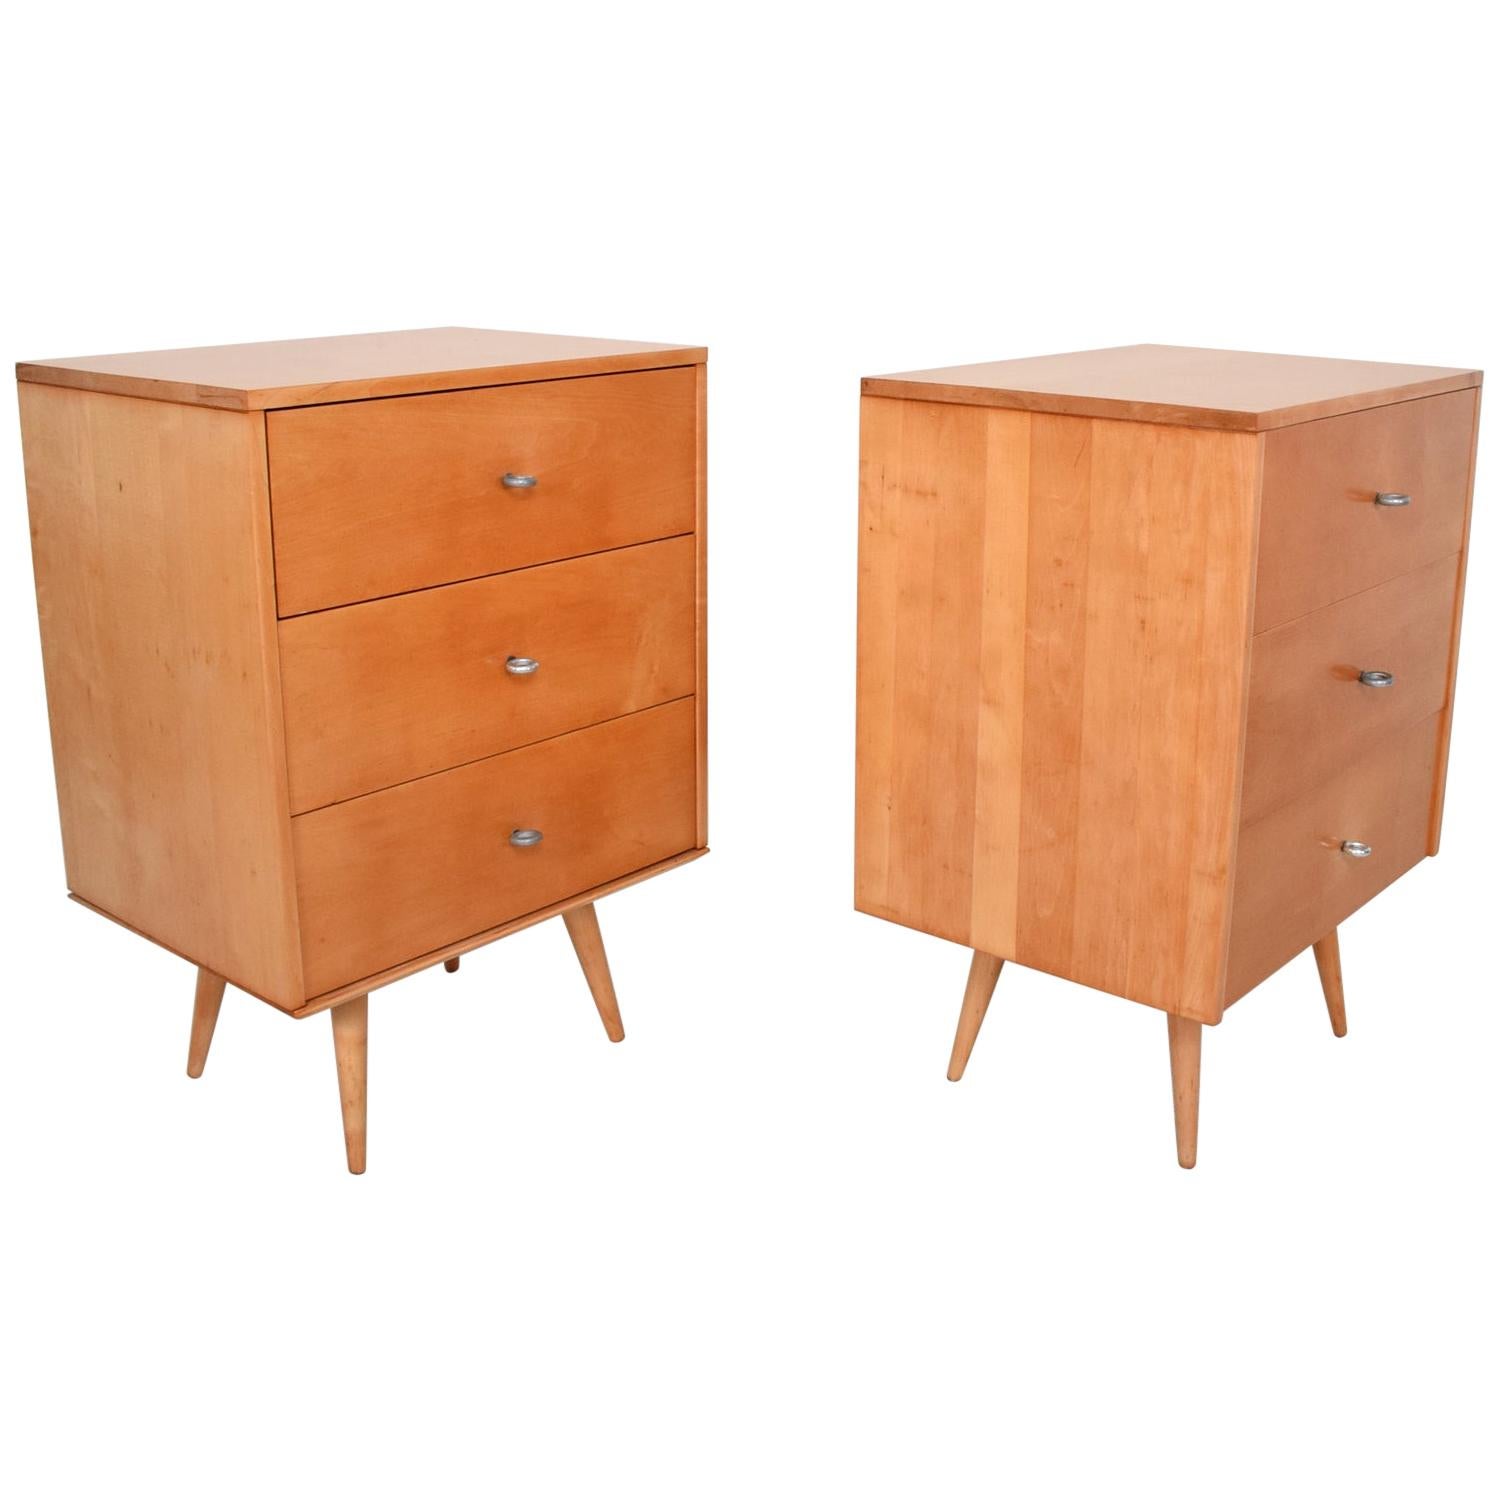 Paul McCobb Maple Lacquered Single Dressers with Silver Pulls 1950s USA - a Pair